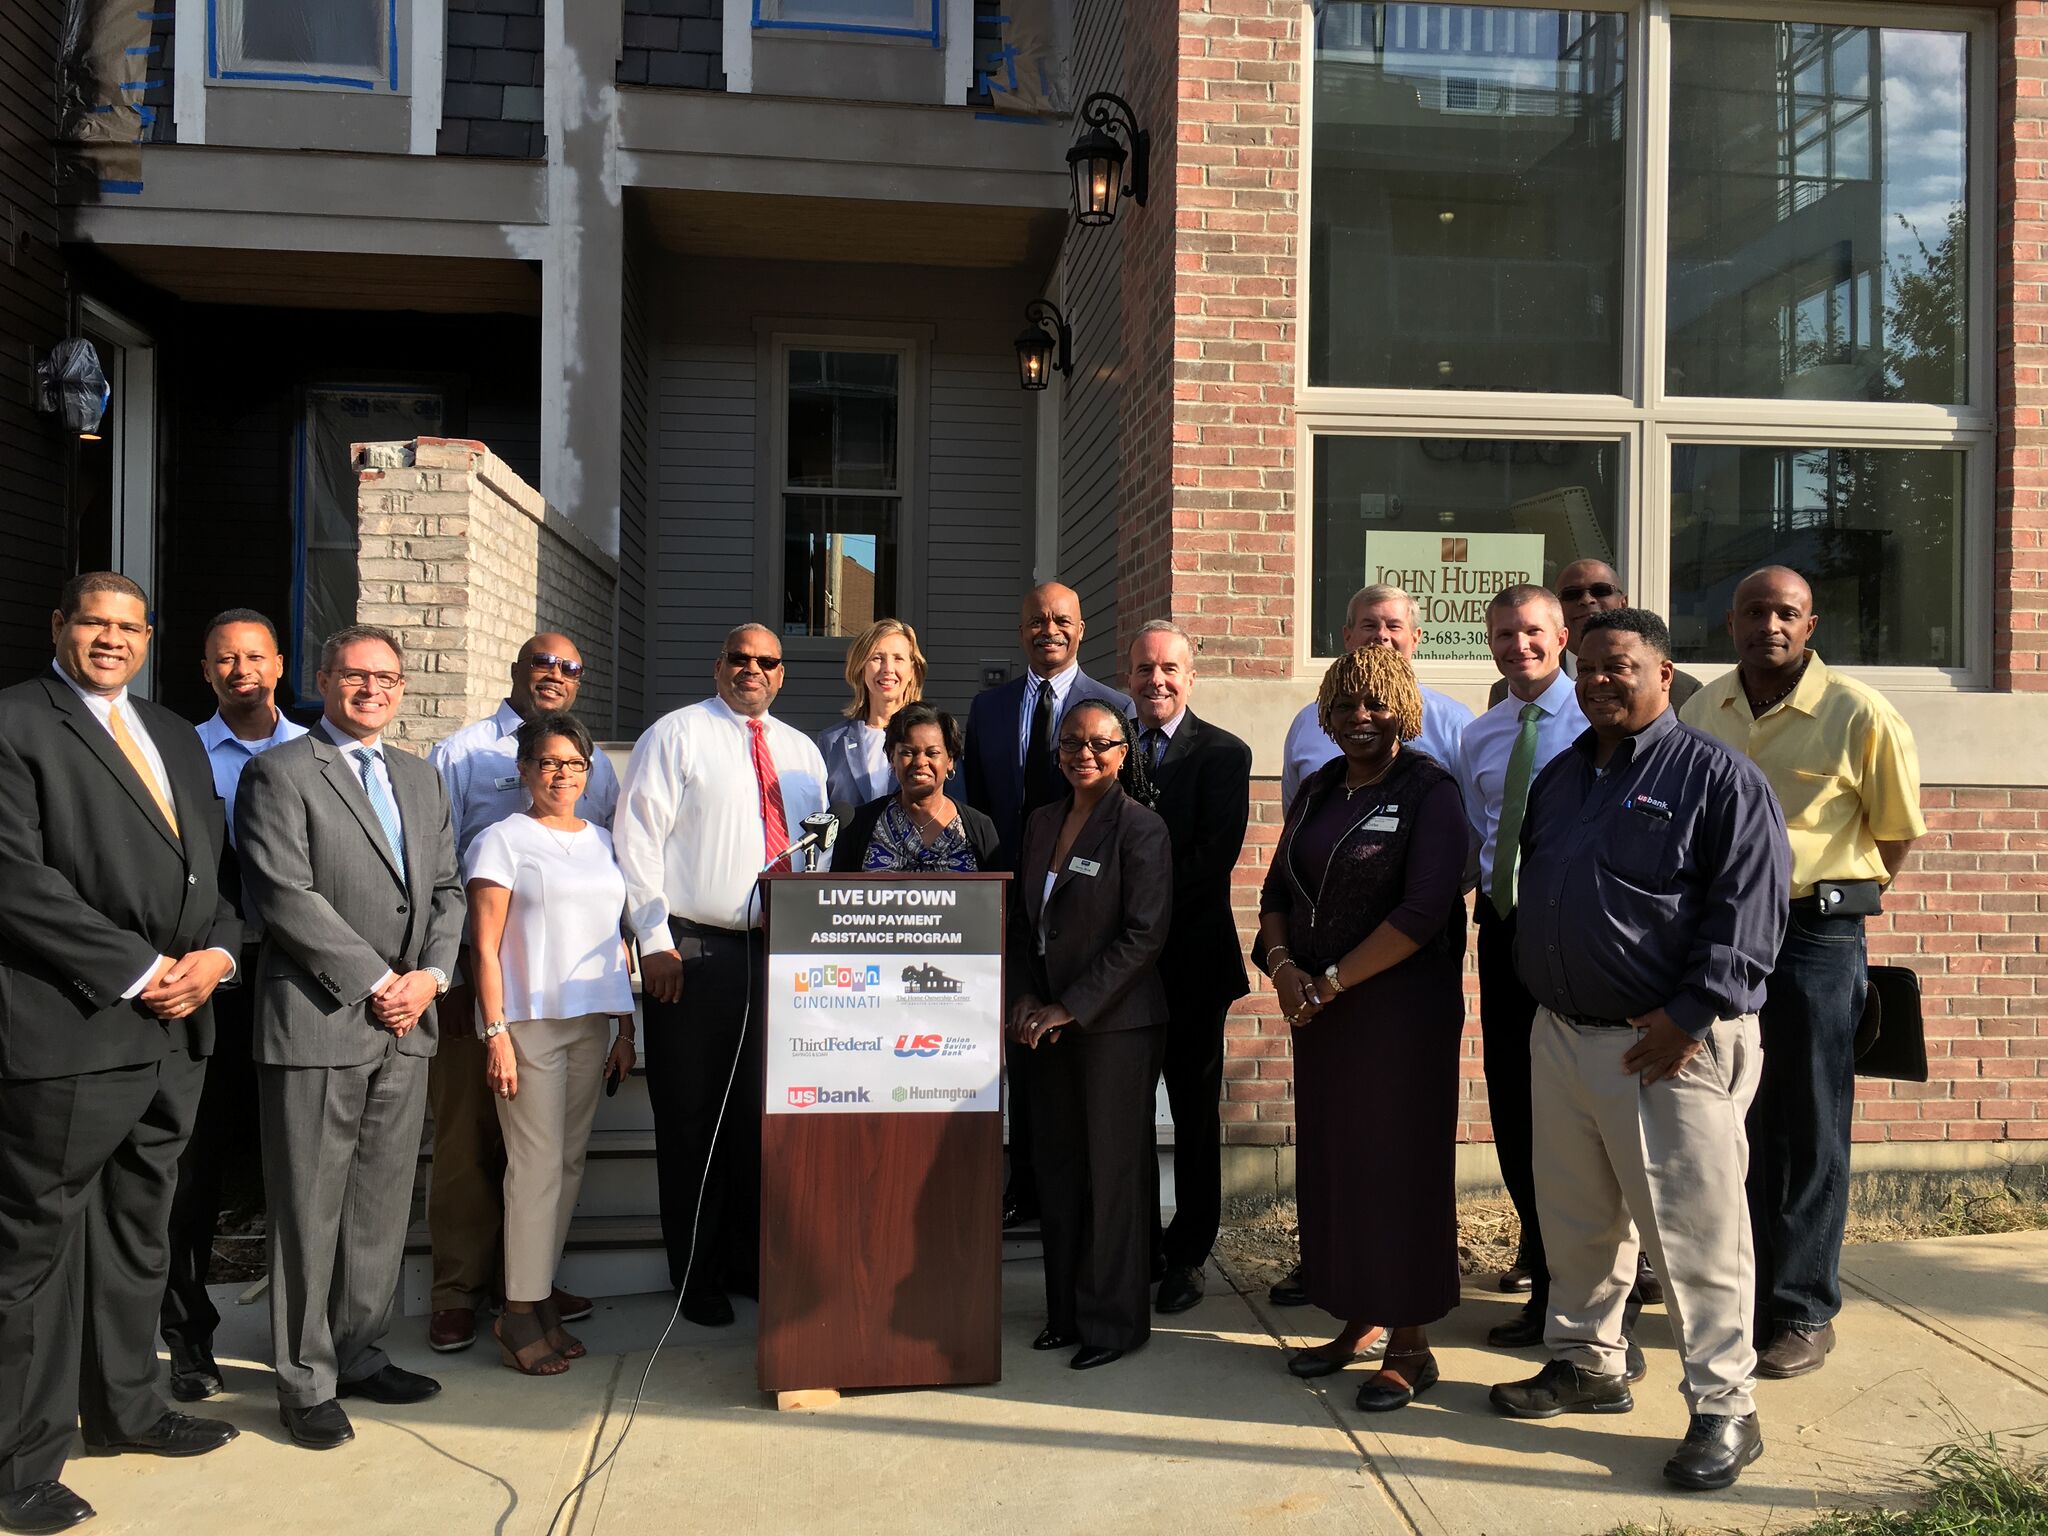 Partners in the Live Uptown Down Payment Assistance Program.